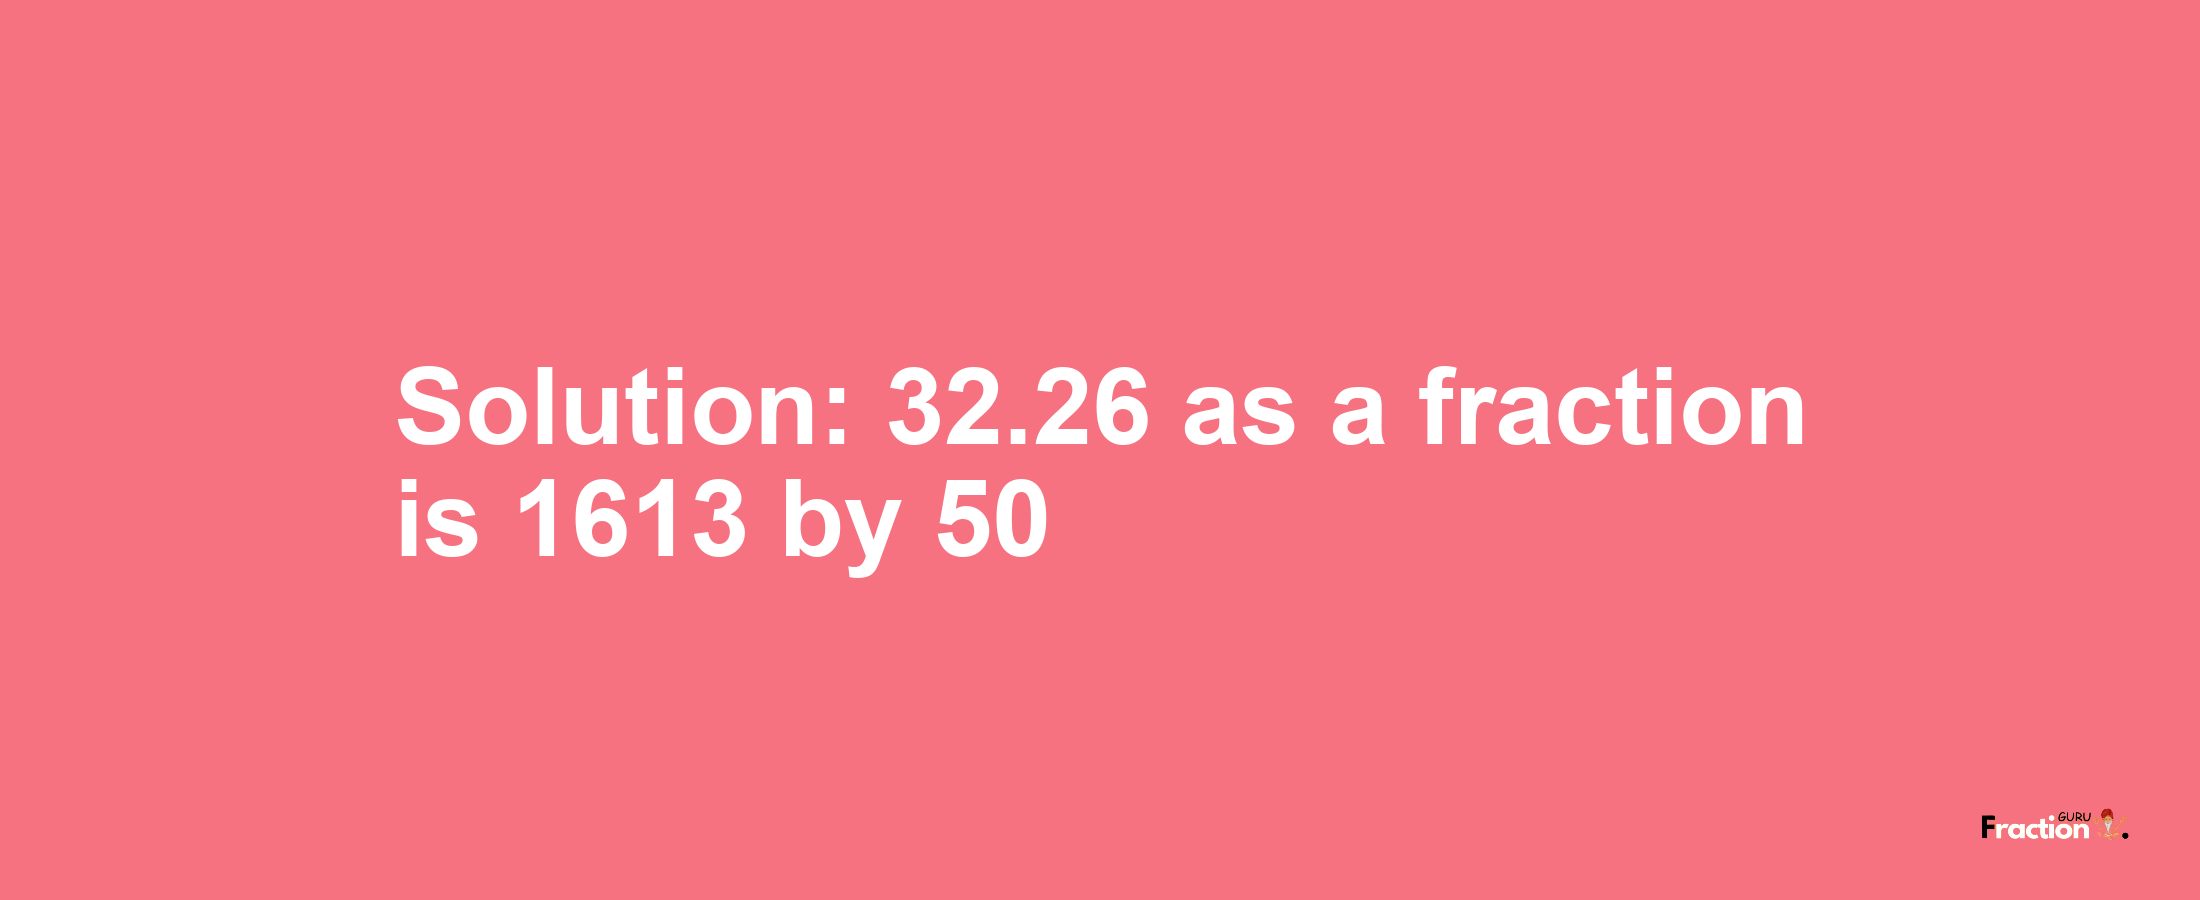 Solution:32.26 as a fraction is 1613/50